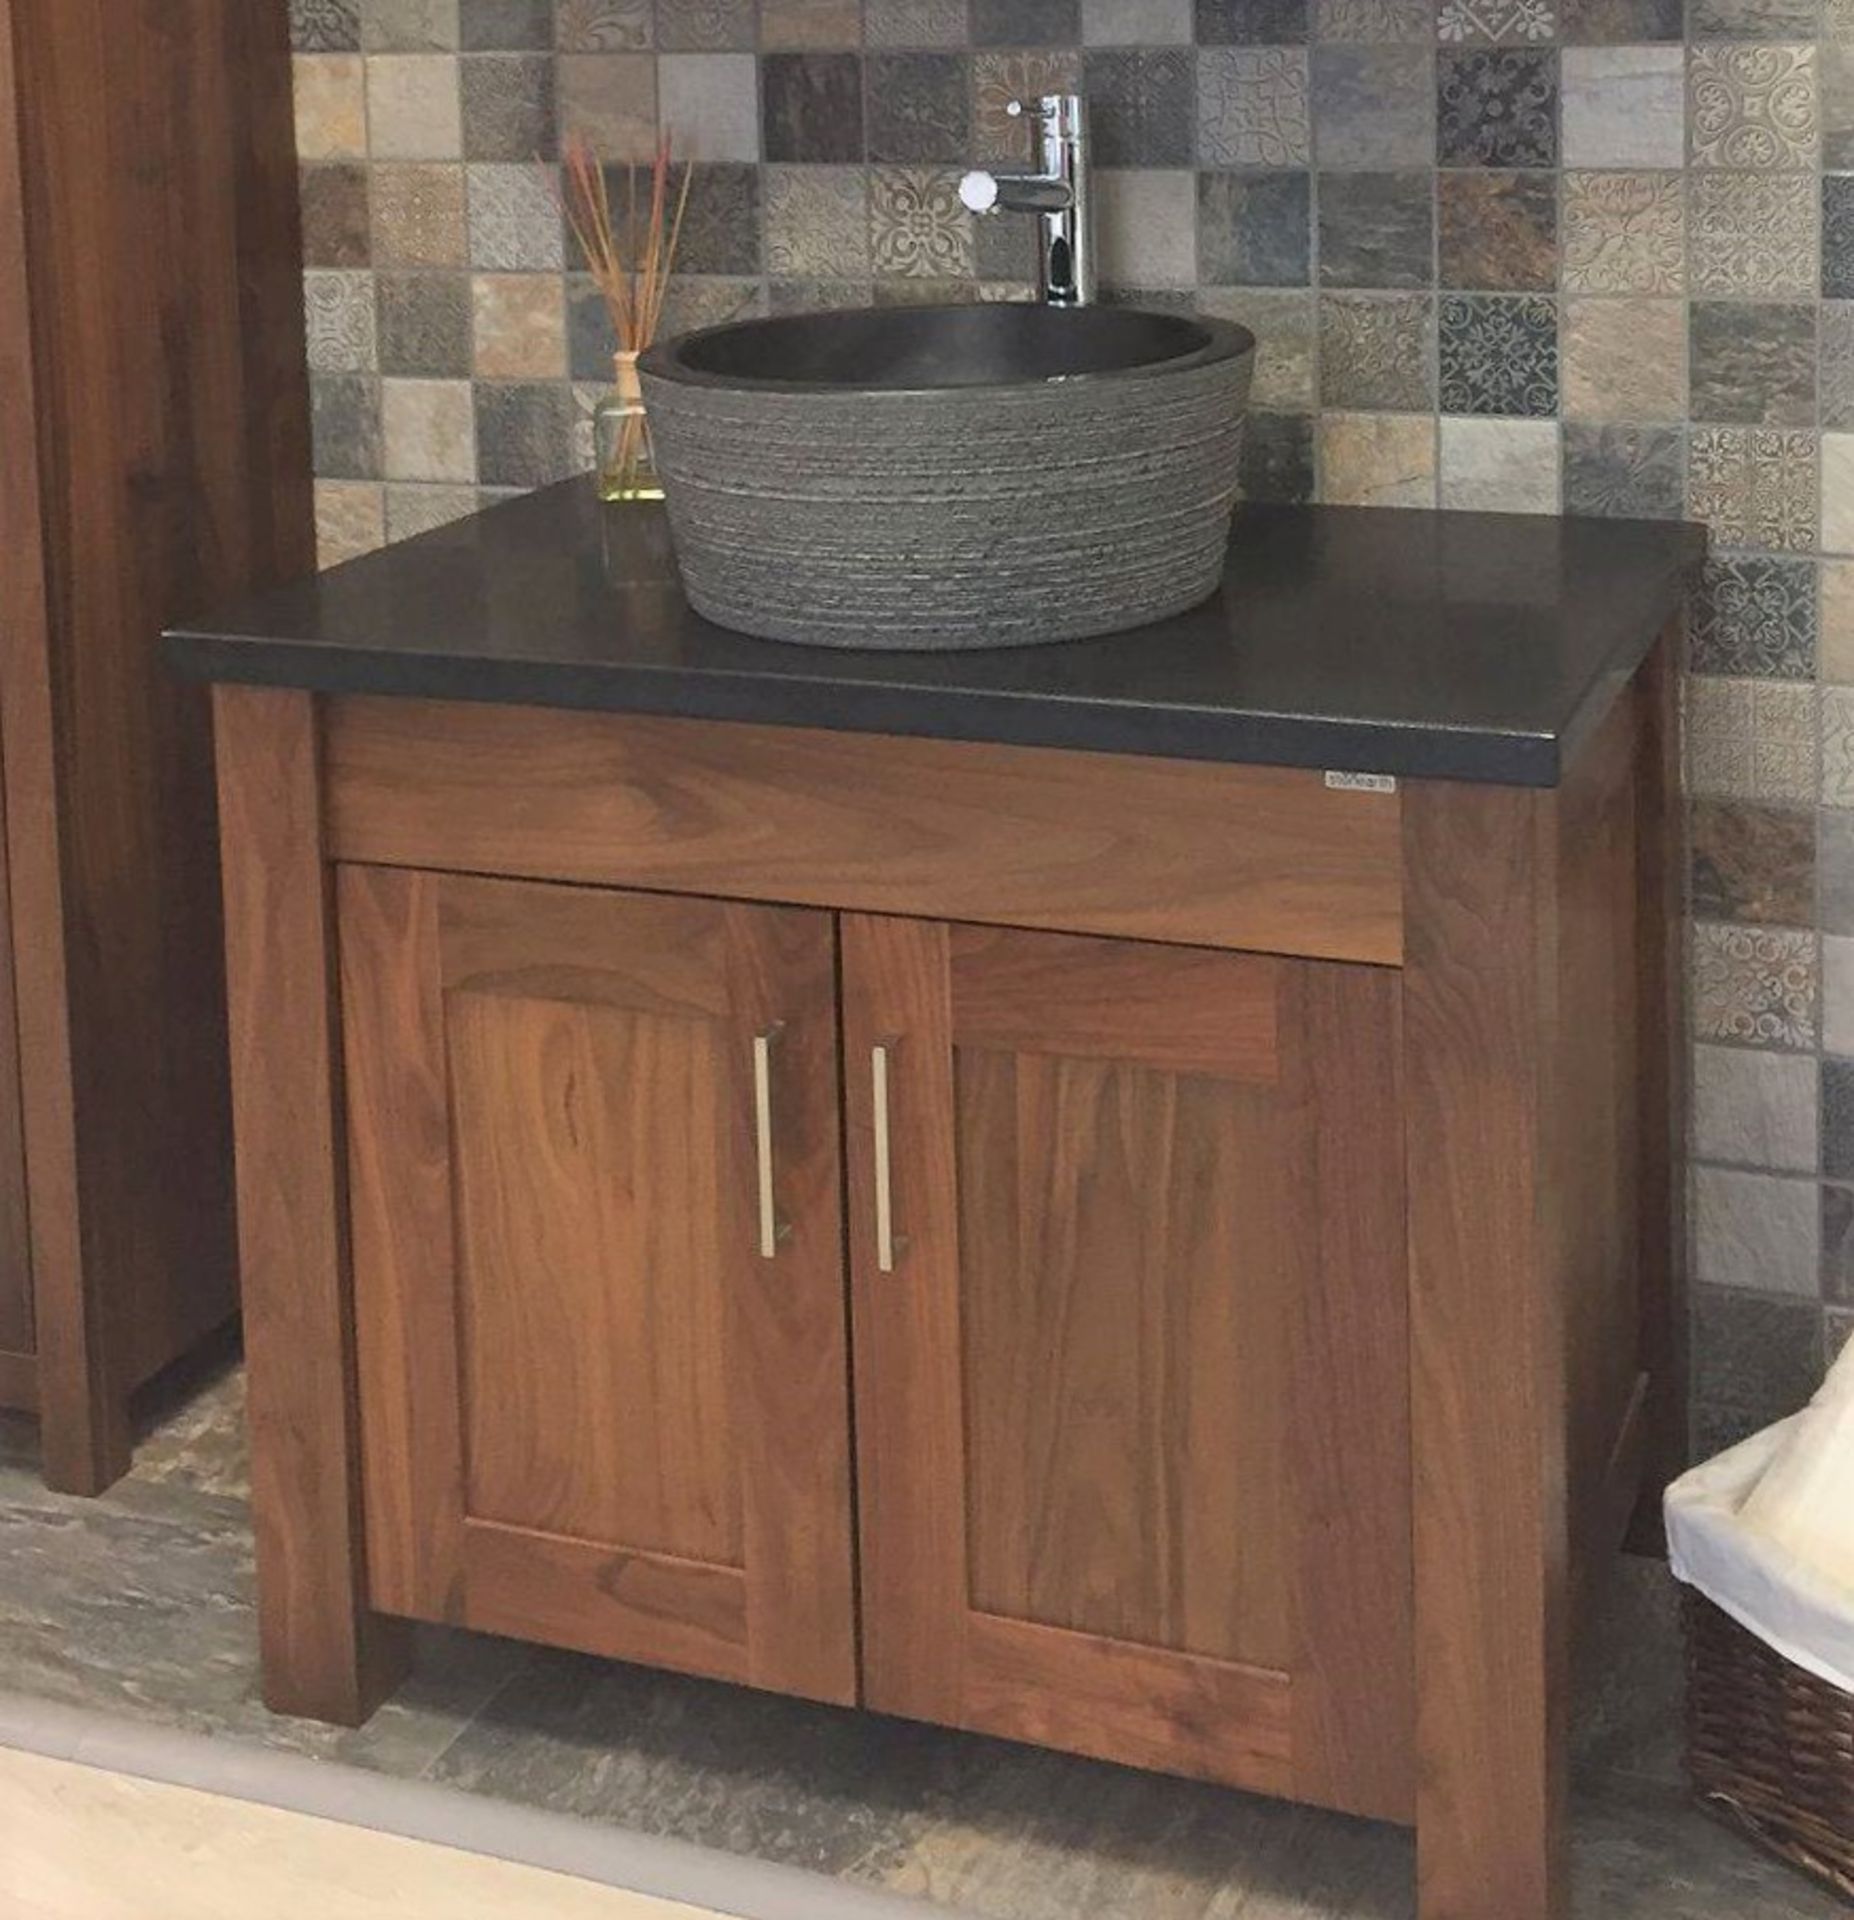 1 x Stonearth 'Finesse' Countertop Washstand - American Solid Walnut - Original RRP £1,400 - Image 5 of 8